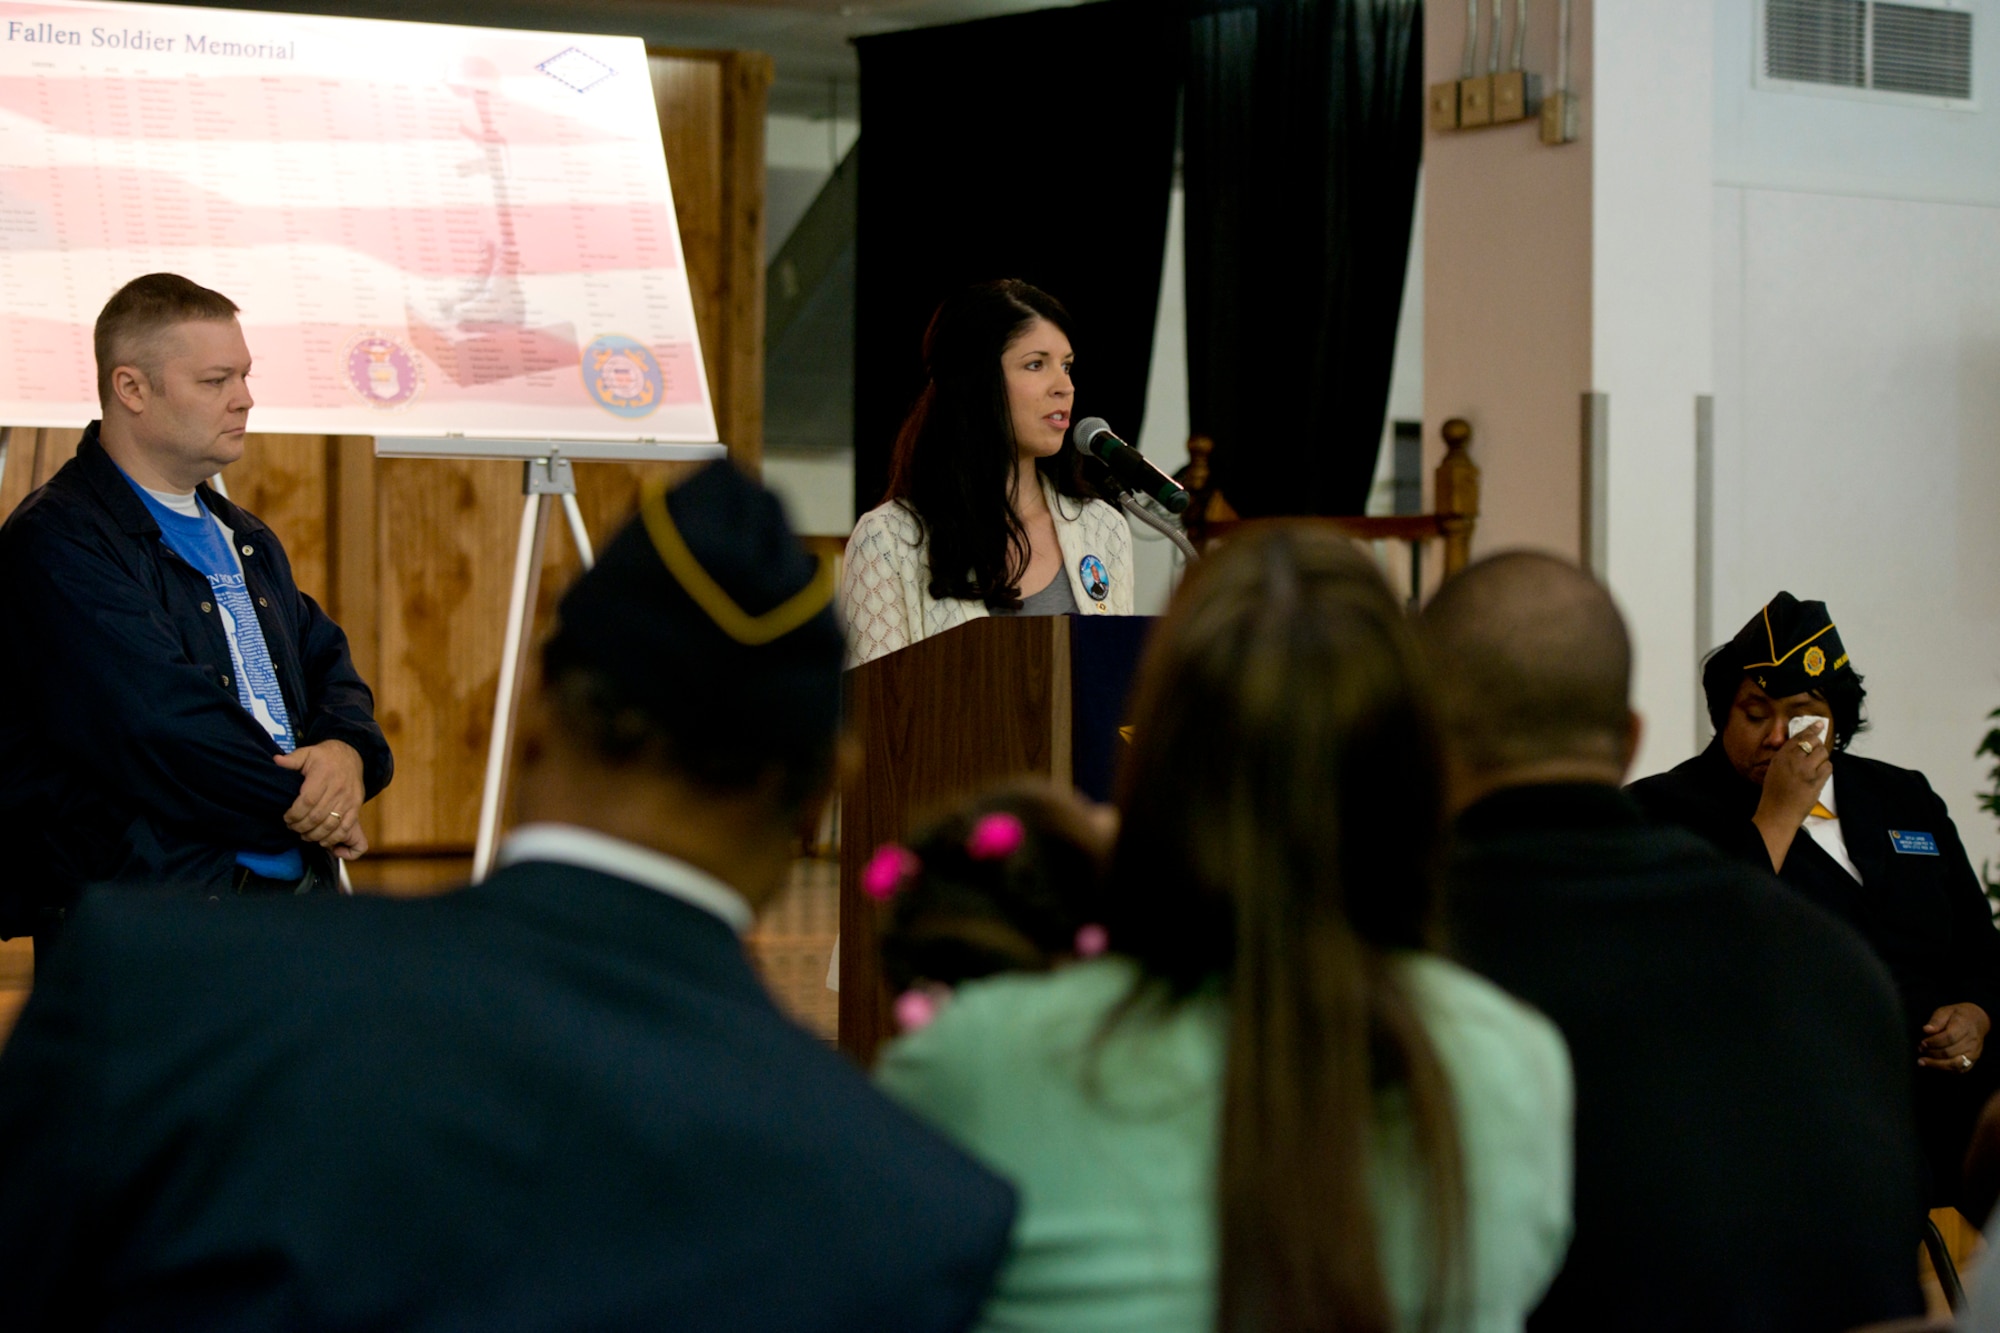 Mrs. Jennifer Legate, daughter of Army National Guard Chief Warrant Officer 4, Patrick W. Kordsmeier, speaks about her father to the audience at the 11th Annual Tribute to Fallen Heroes Ceremony in Sherwood, Ark., Apr. 9, 2016. CW4 Kordsmeier died Apr. 24, 2004, in Taji, Iraq, when mortar rounds hit his camp. (U.S. Air Force photo by Master Sgt. Jeff Walston/released)